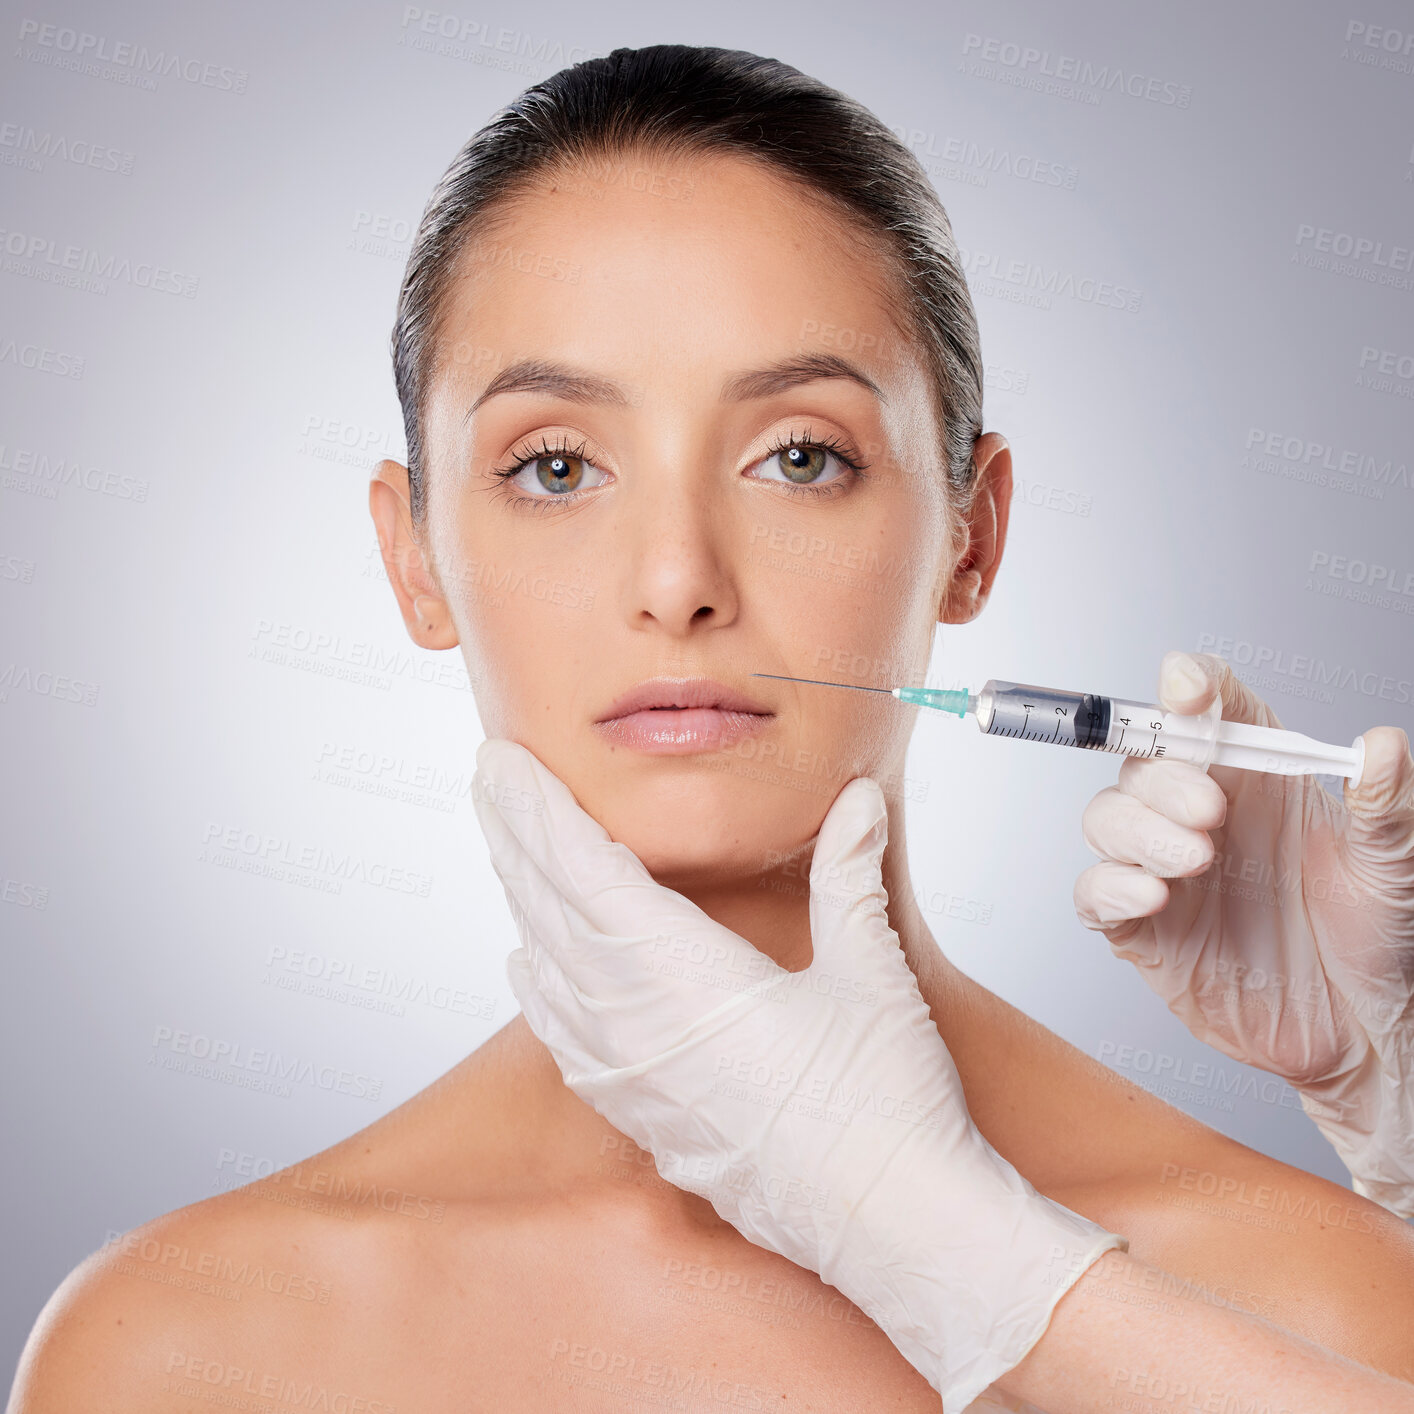 Buy stock photo Shot of a beautiful young woman getting her face injected by gloved hands against a grey background